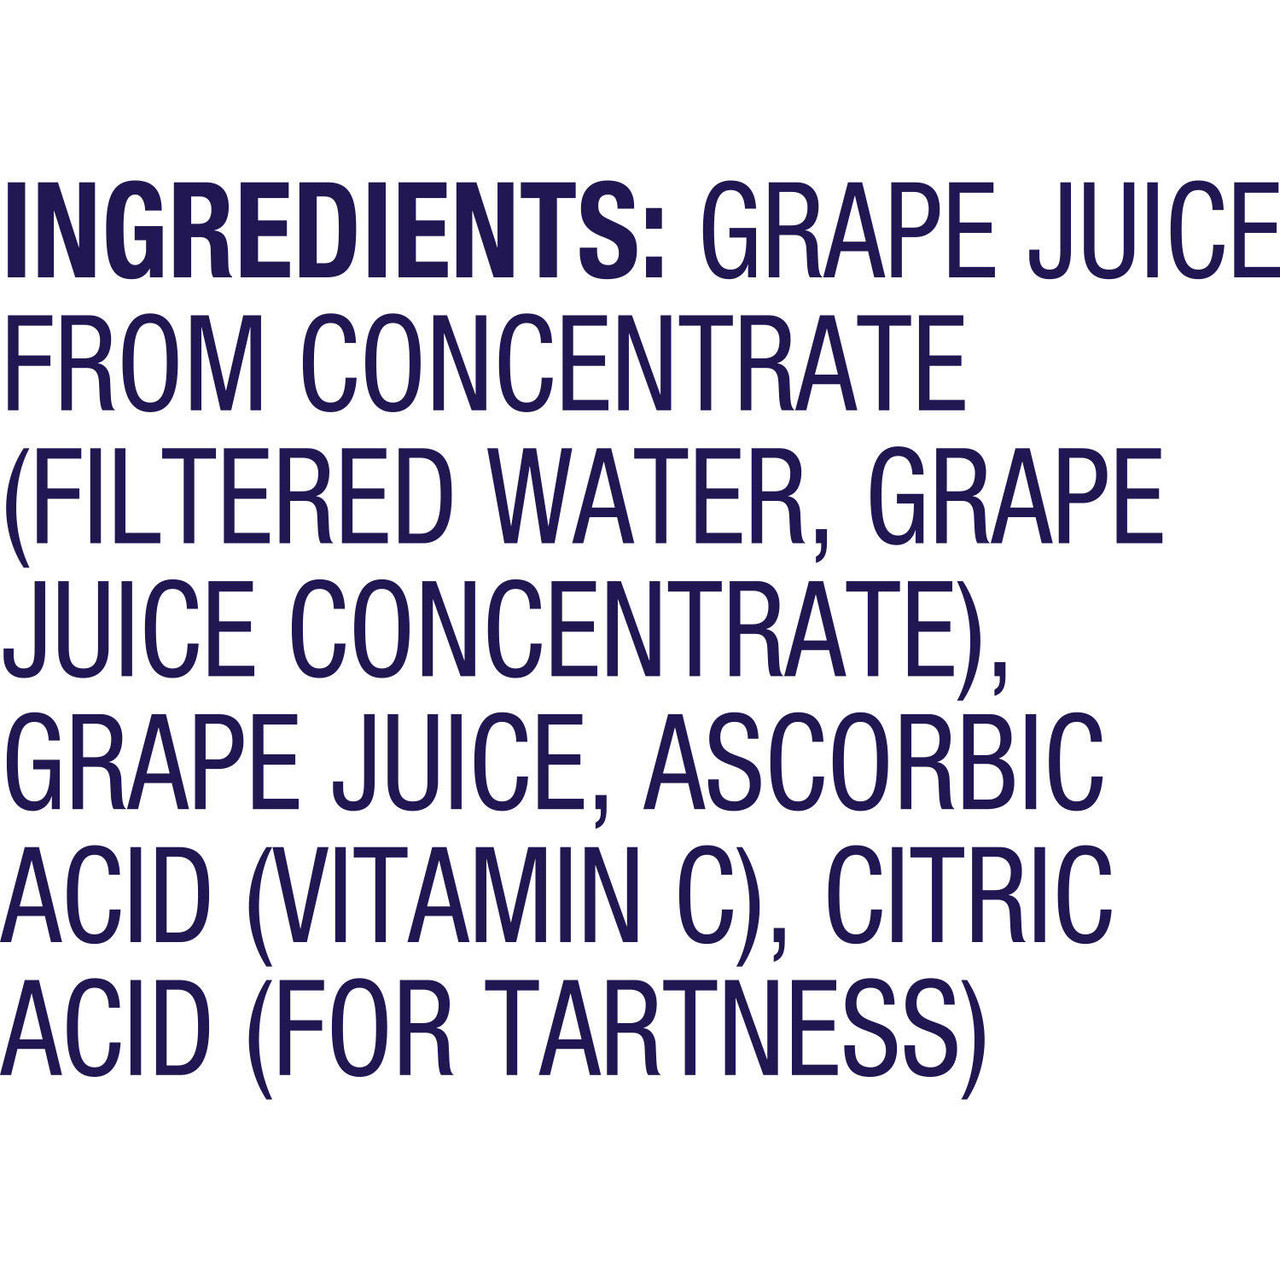 Welch's 100% Grape Juice (64 fl. oz., 2 pk.) - [From 45.00 - Choose pk Qty ] - *Ships from Miami